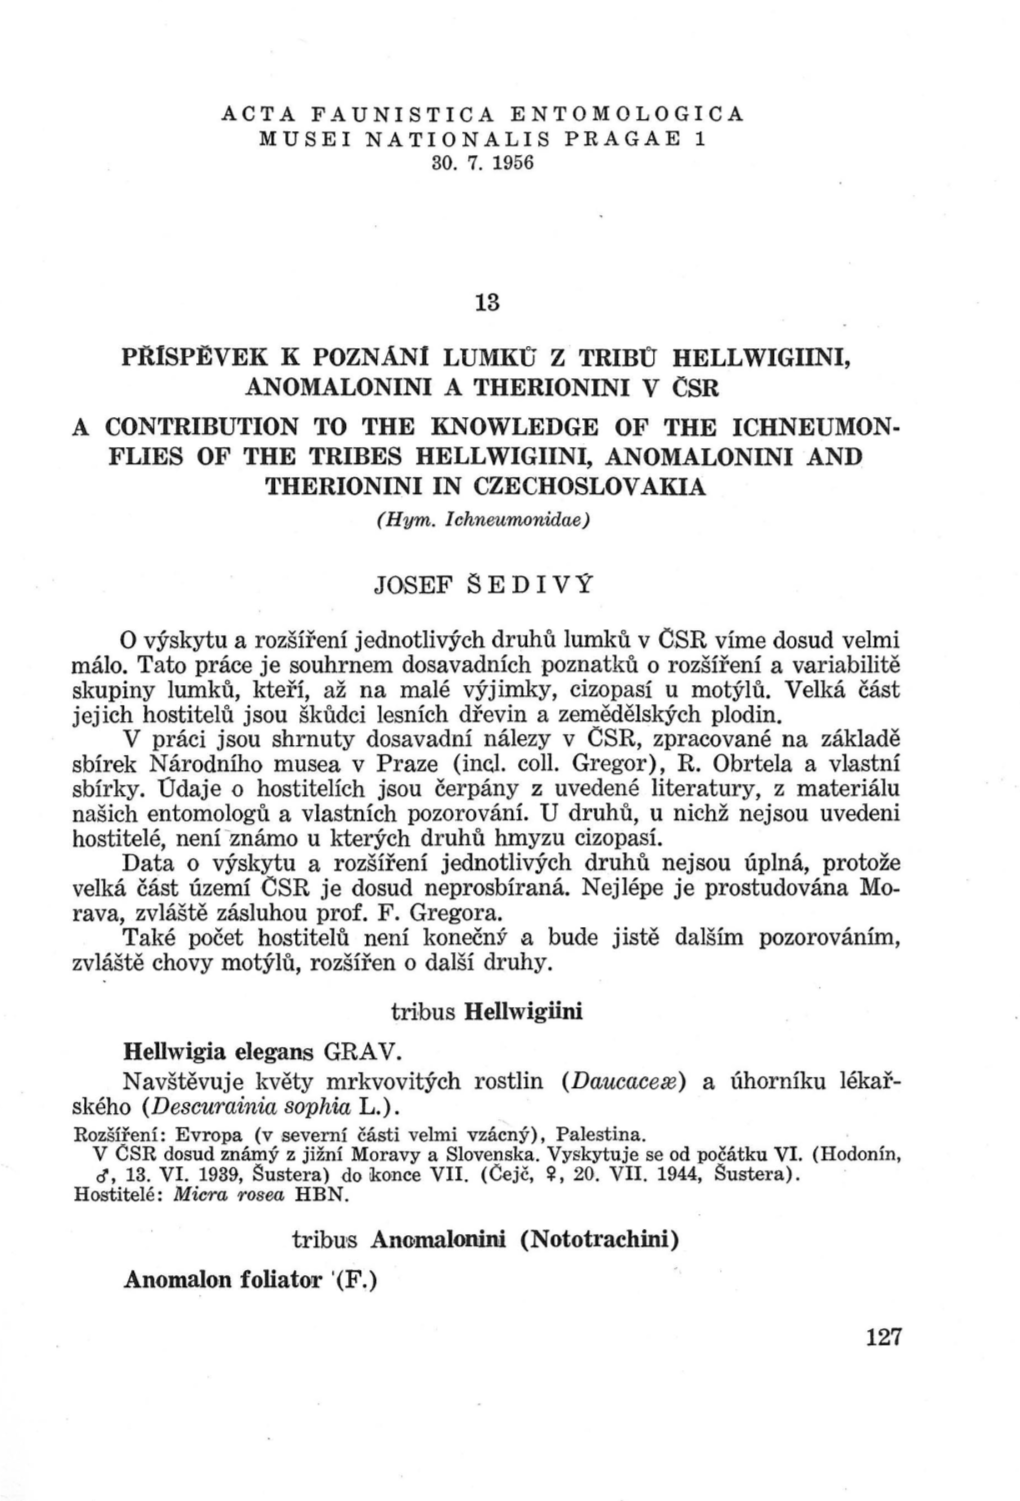 ANOMALONINI a THERIONINI V CSR a CONTRIBUTION to the KNOWLEDGE of the ICHNEUMON­ FLIES of the TRIBES HELLWIGIINI, ANOMALONINI and THERIONINI in CZECHOSLOV AKIA (Hym